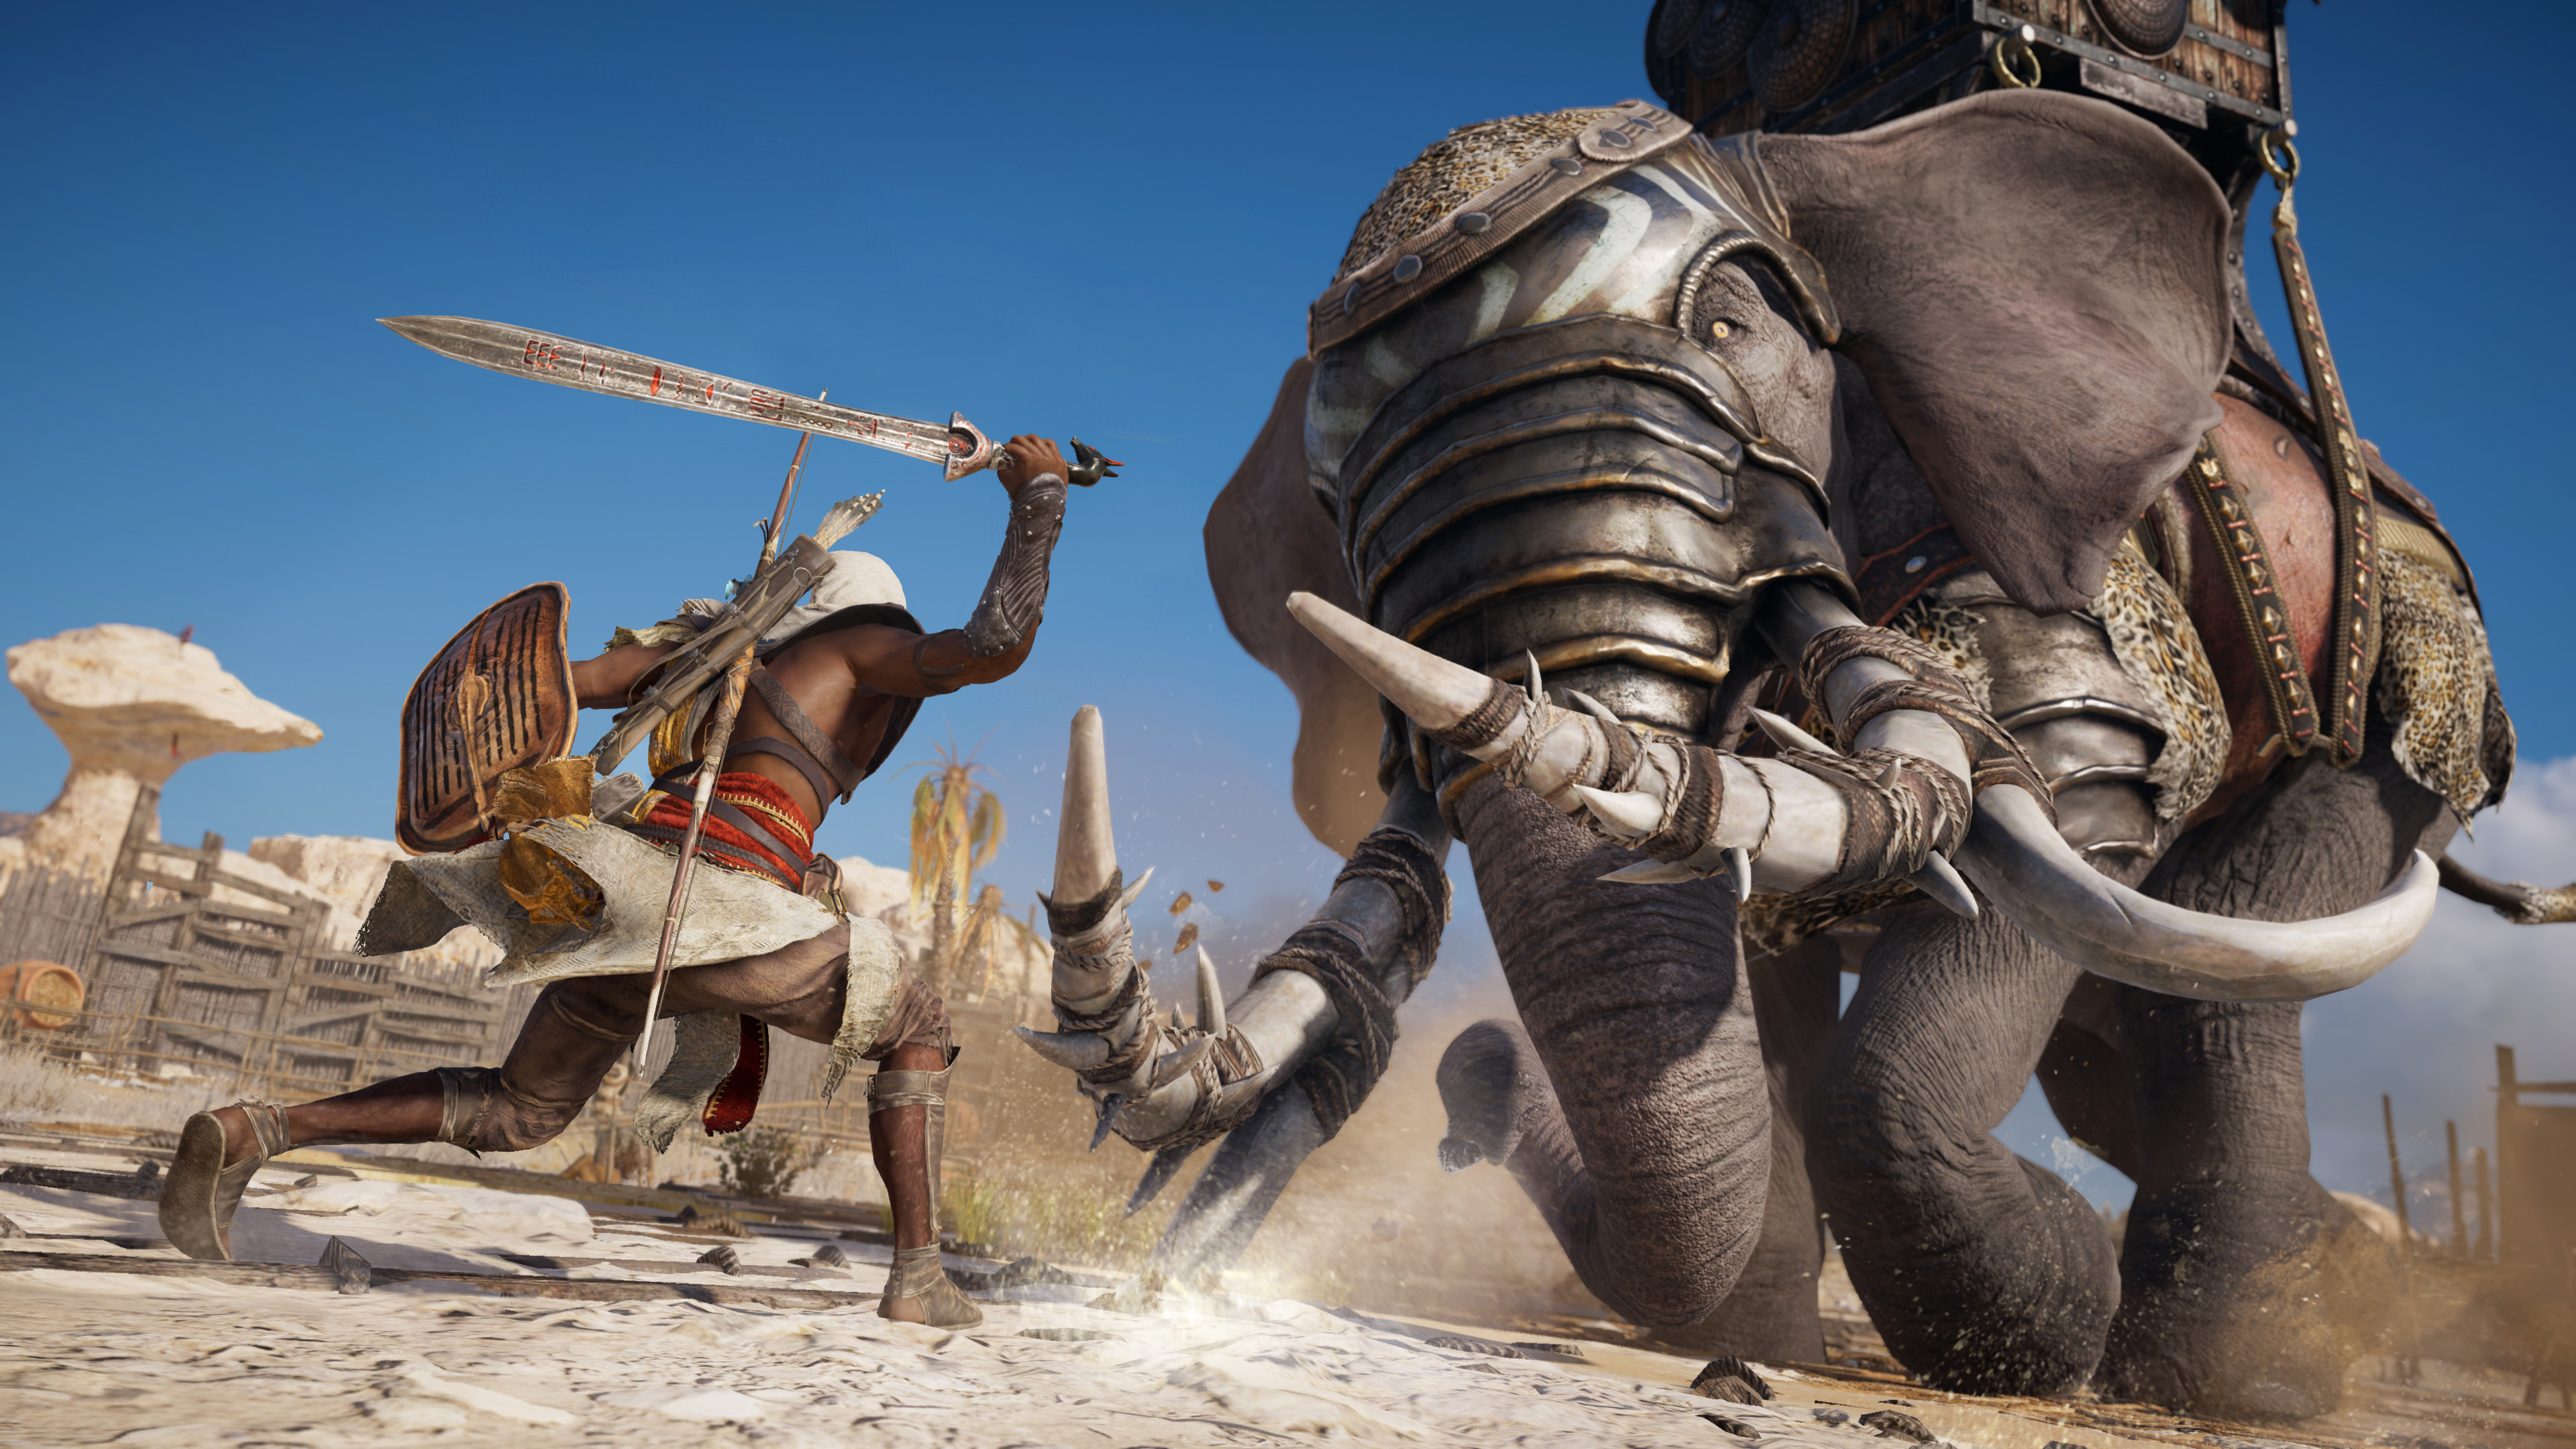 Assassin's Creed: Origins system requirements revealed